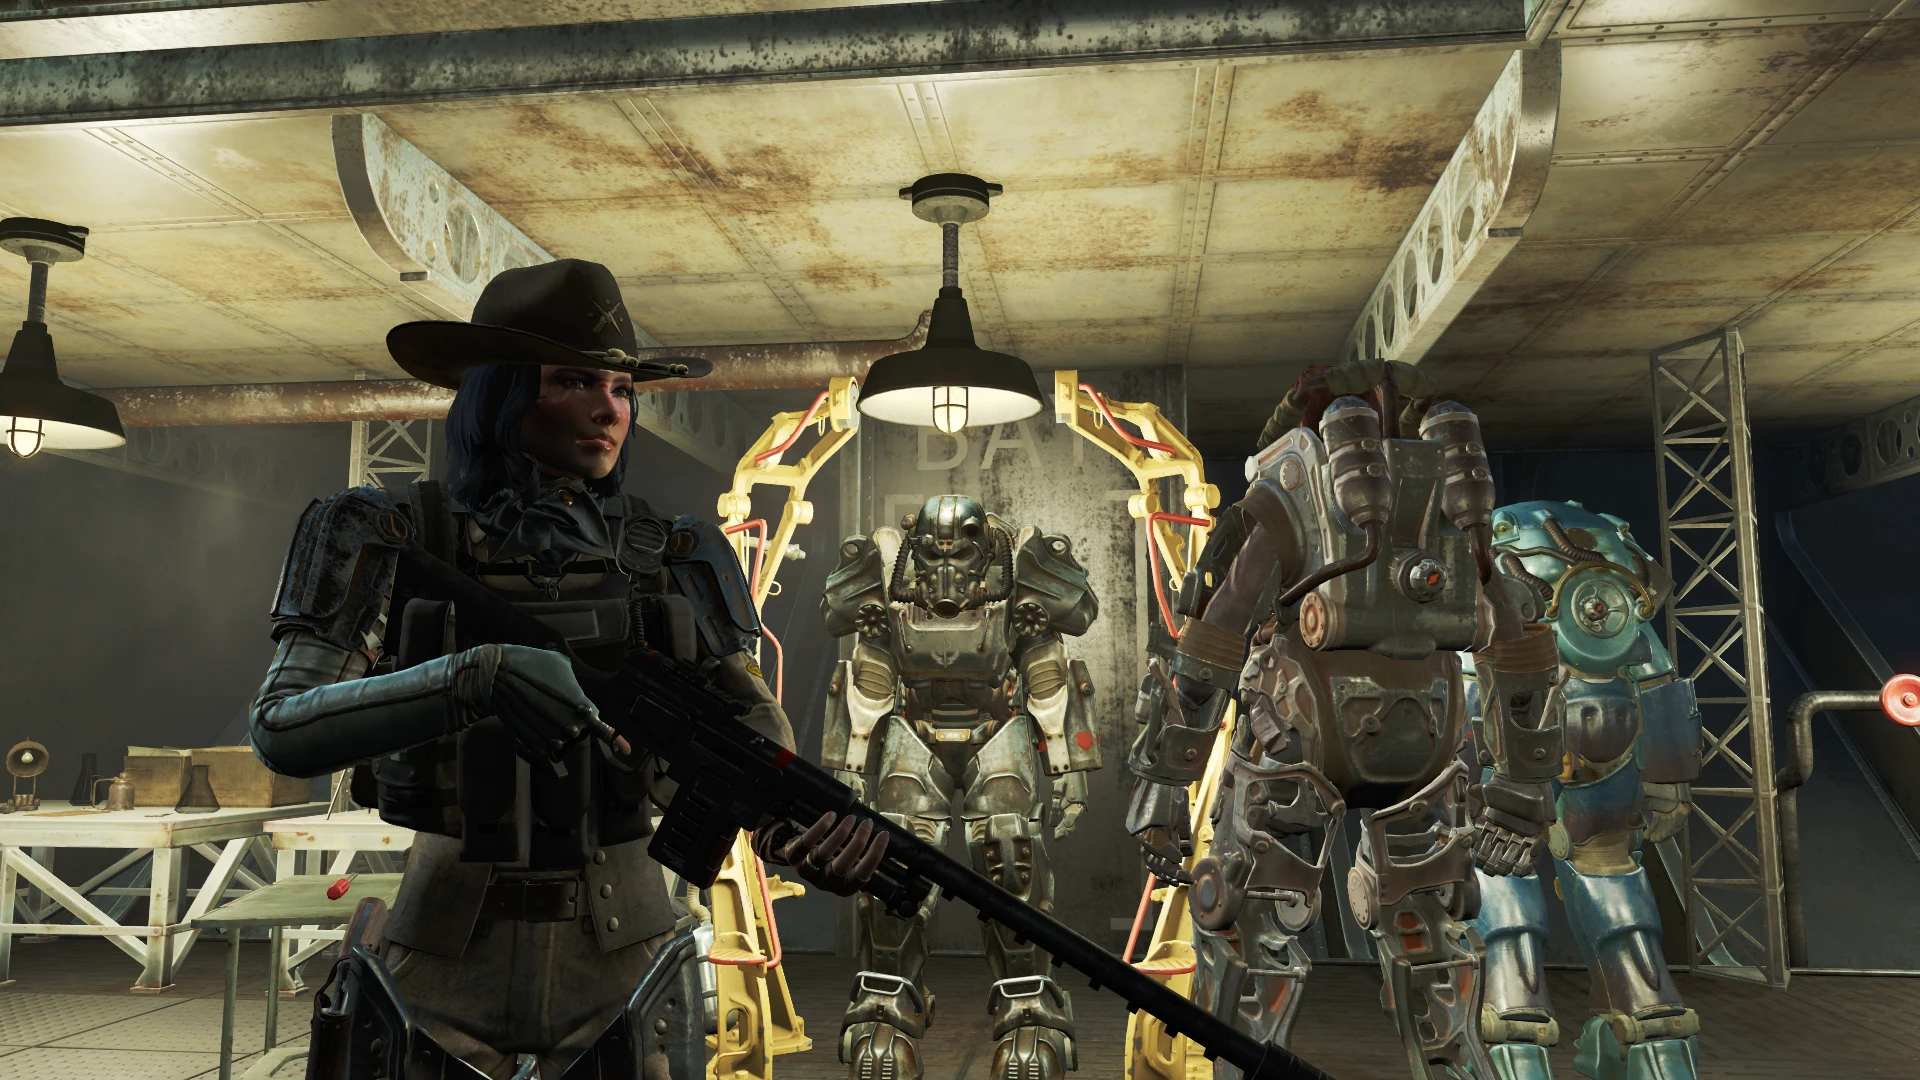 Militarized minutemen at fallout 4 фото 32